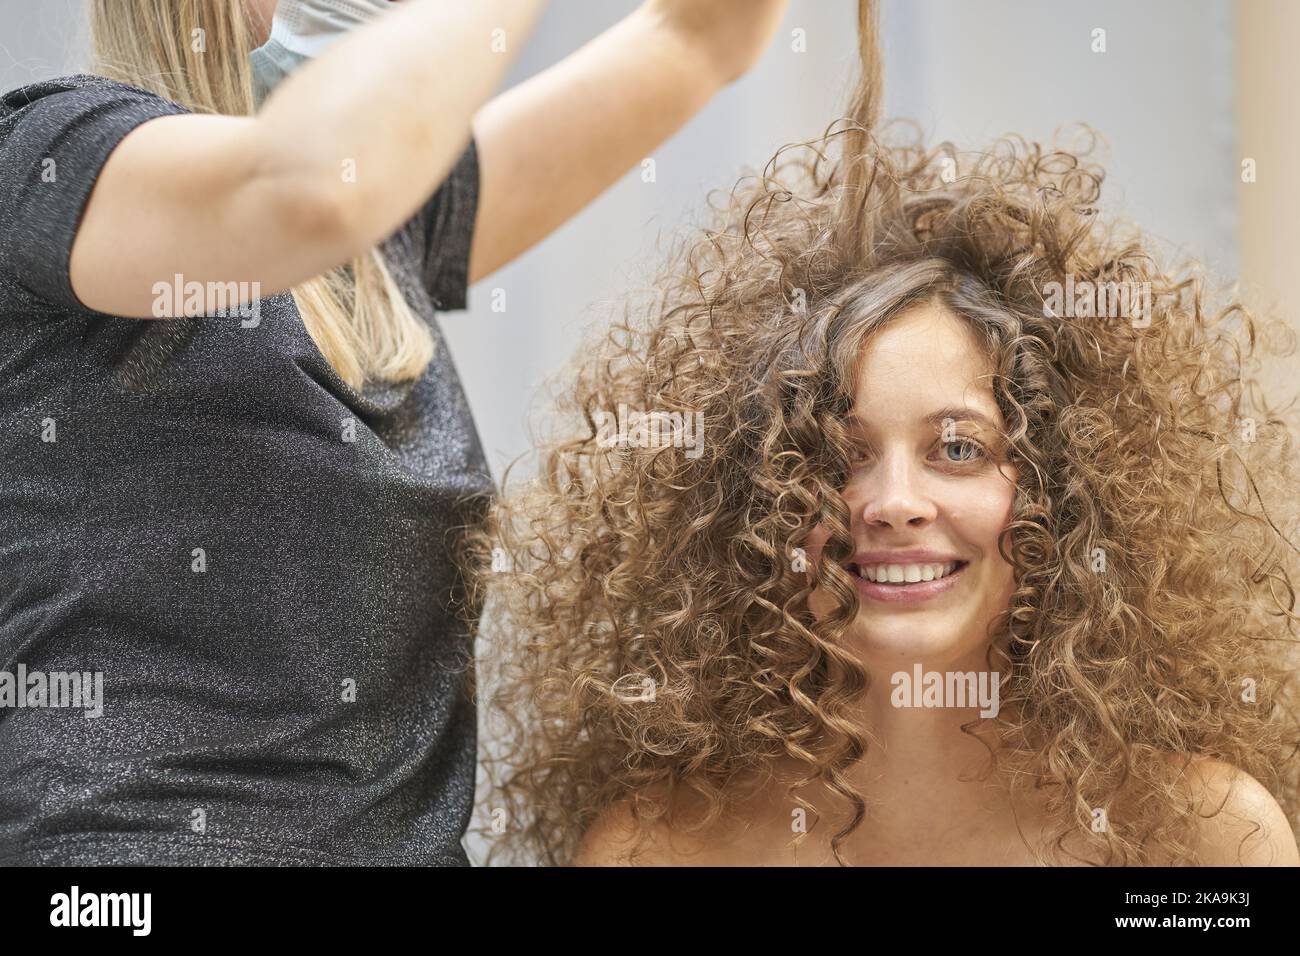 The hair master in face mask makes a curly hairstyle for a smiling woman. Portrait of a beautiful Caucasian girl with flowing curly hair. The concept of beauty salon. High quality photo Stock Photo